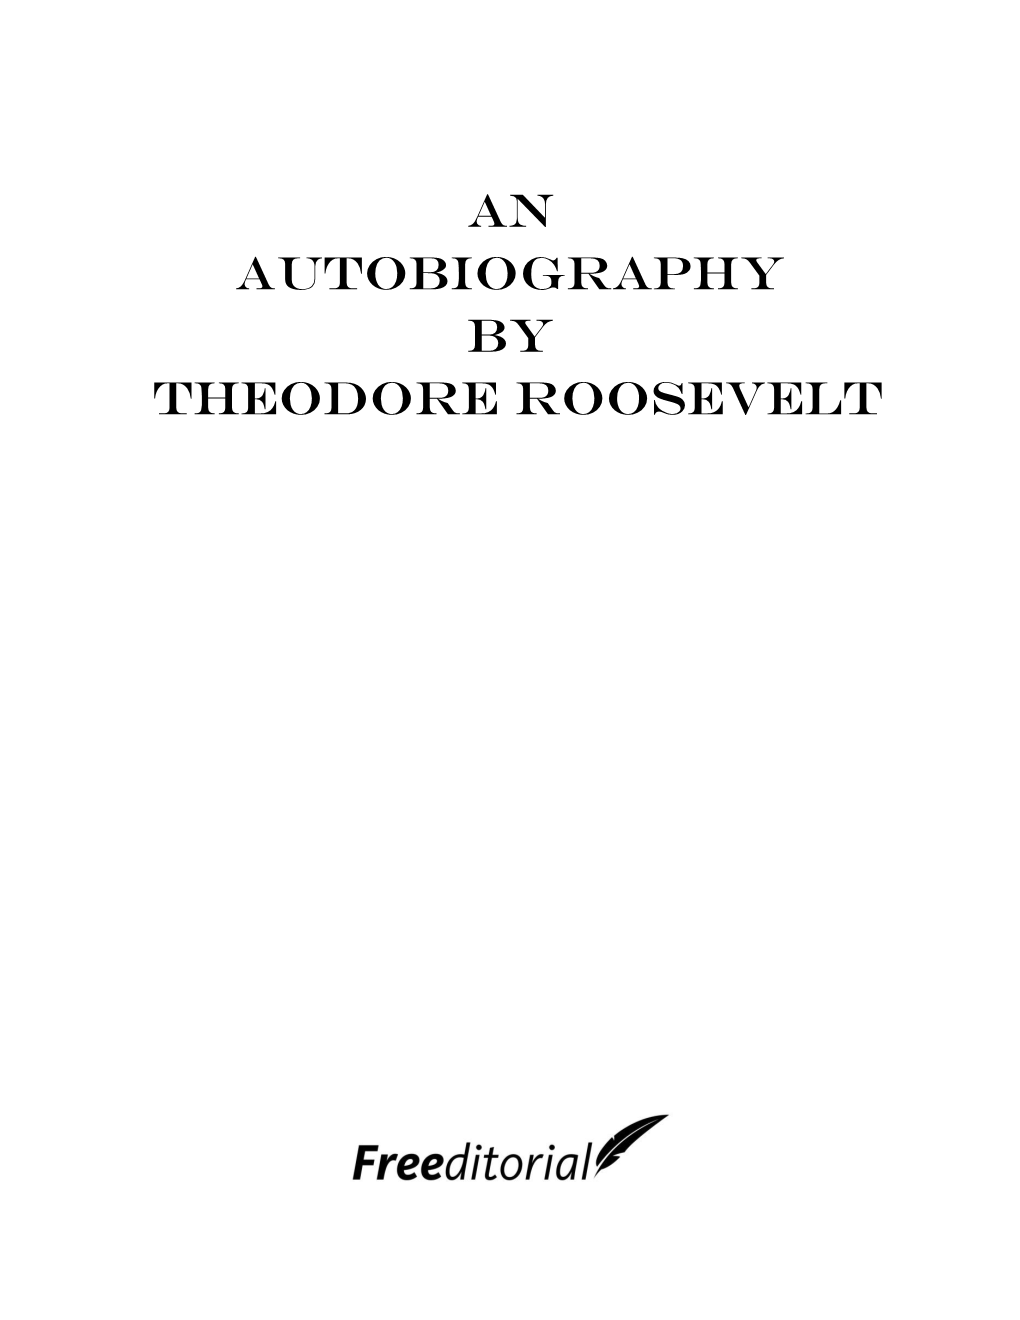 An Autobiography by Theodore Roosevelt